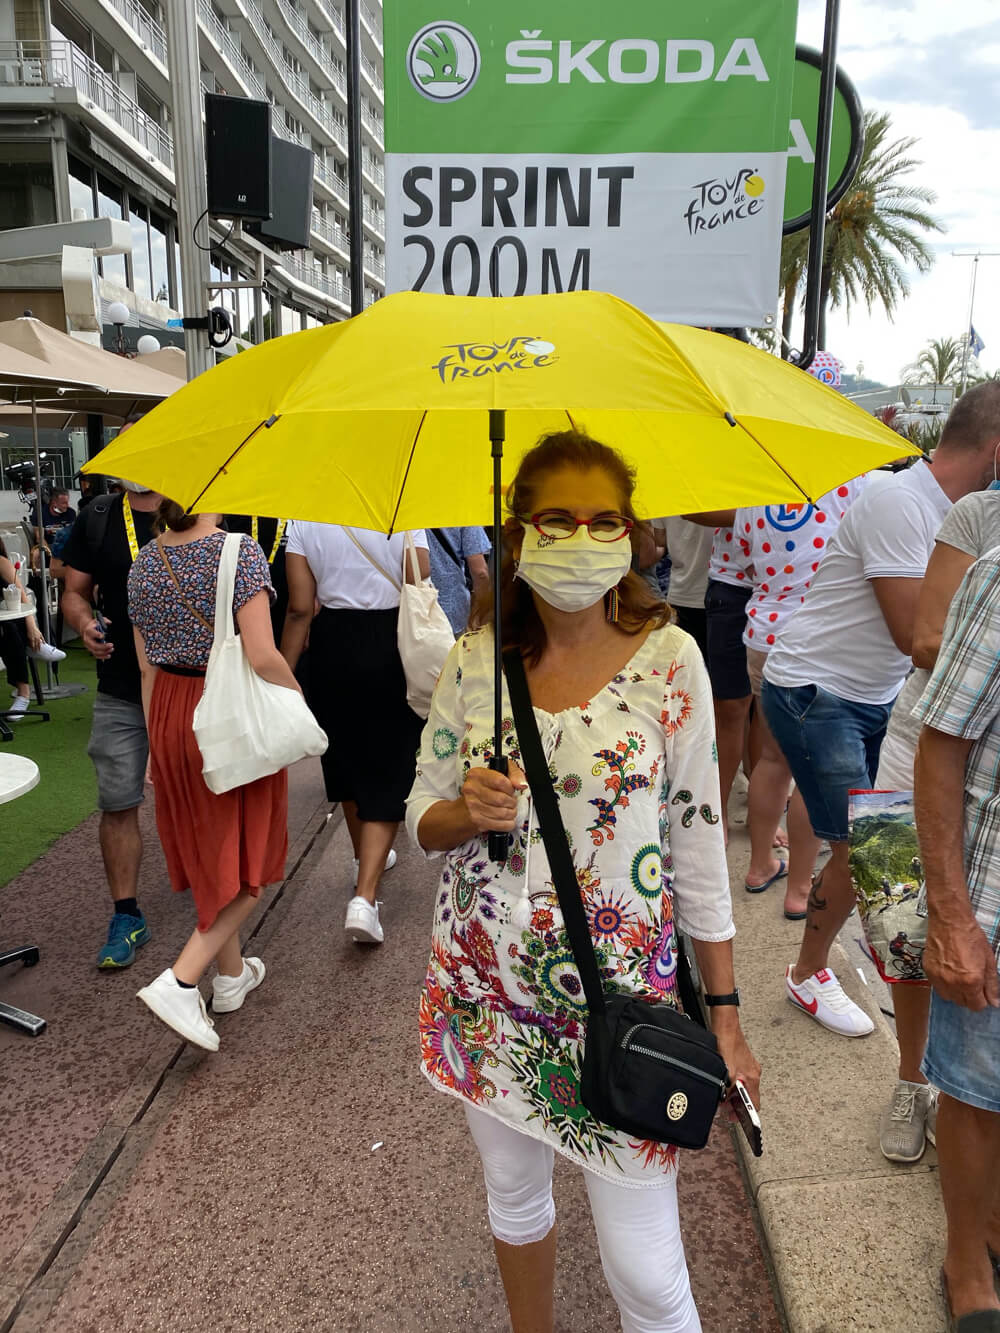 Adrian with Her Yellow Tour de France Umbrella